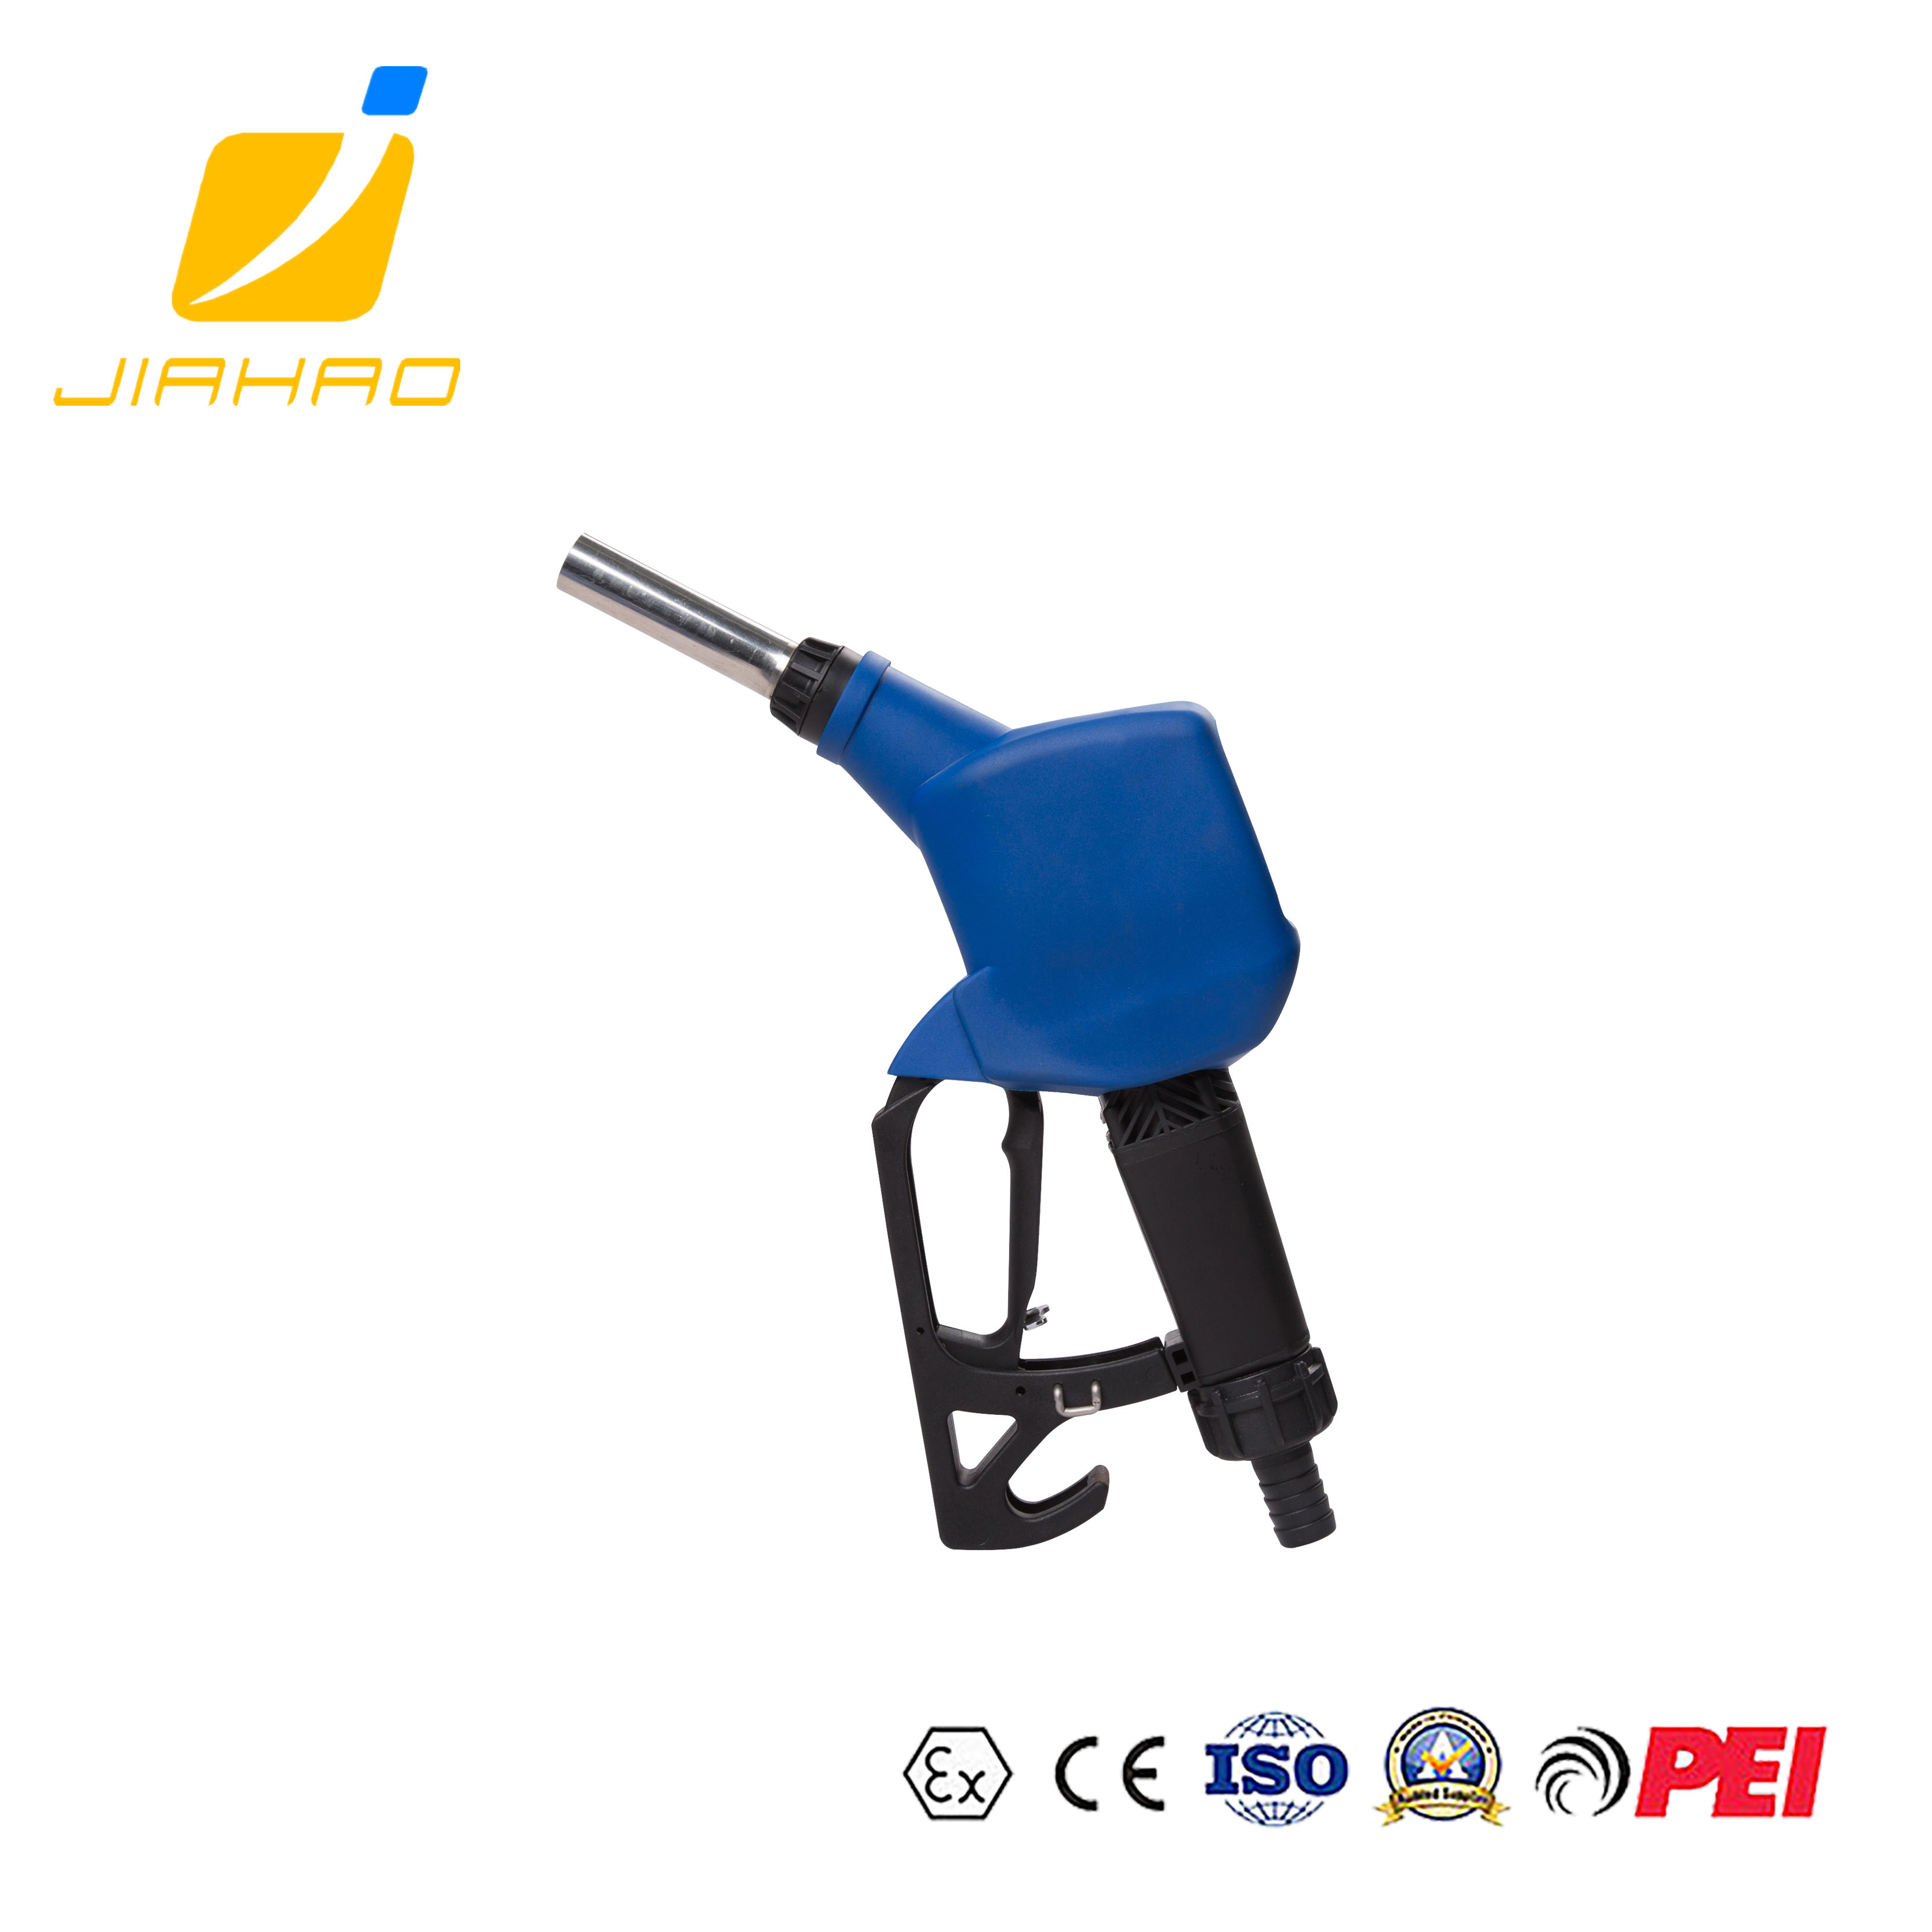 JH-AUSQ-30B CHEMICAL DISPENSING NOZZLE WITH FLOW METER